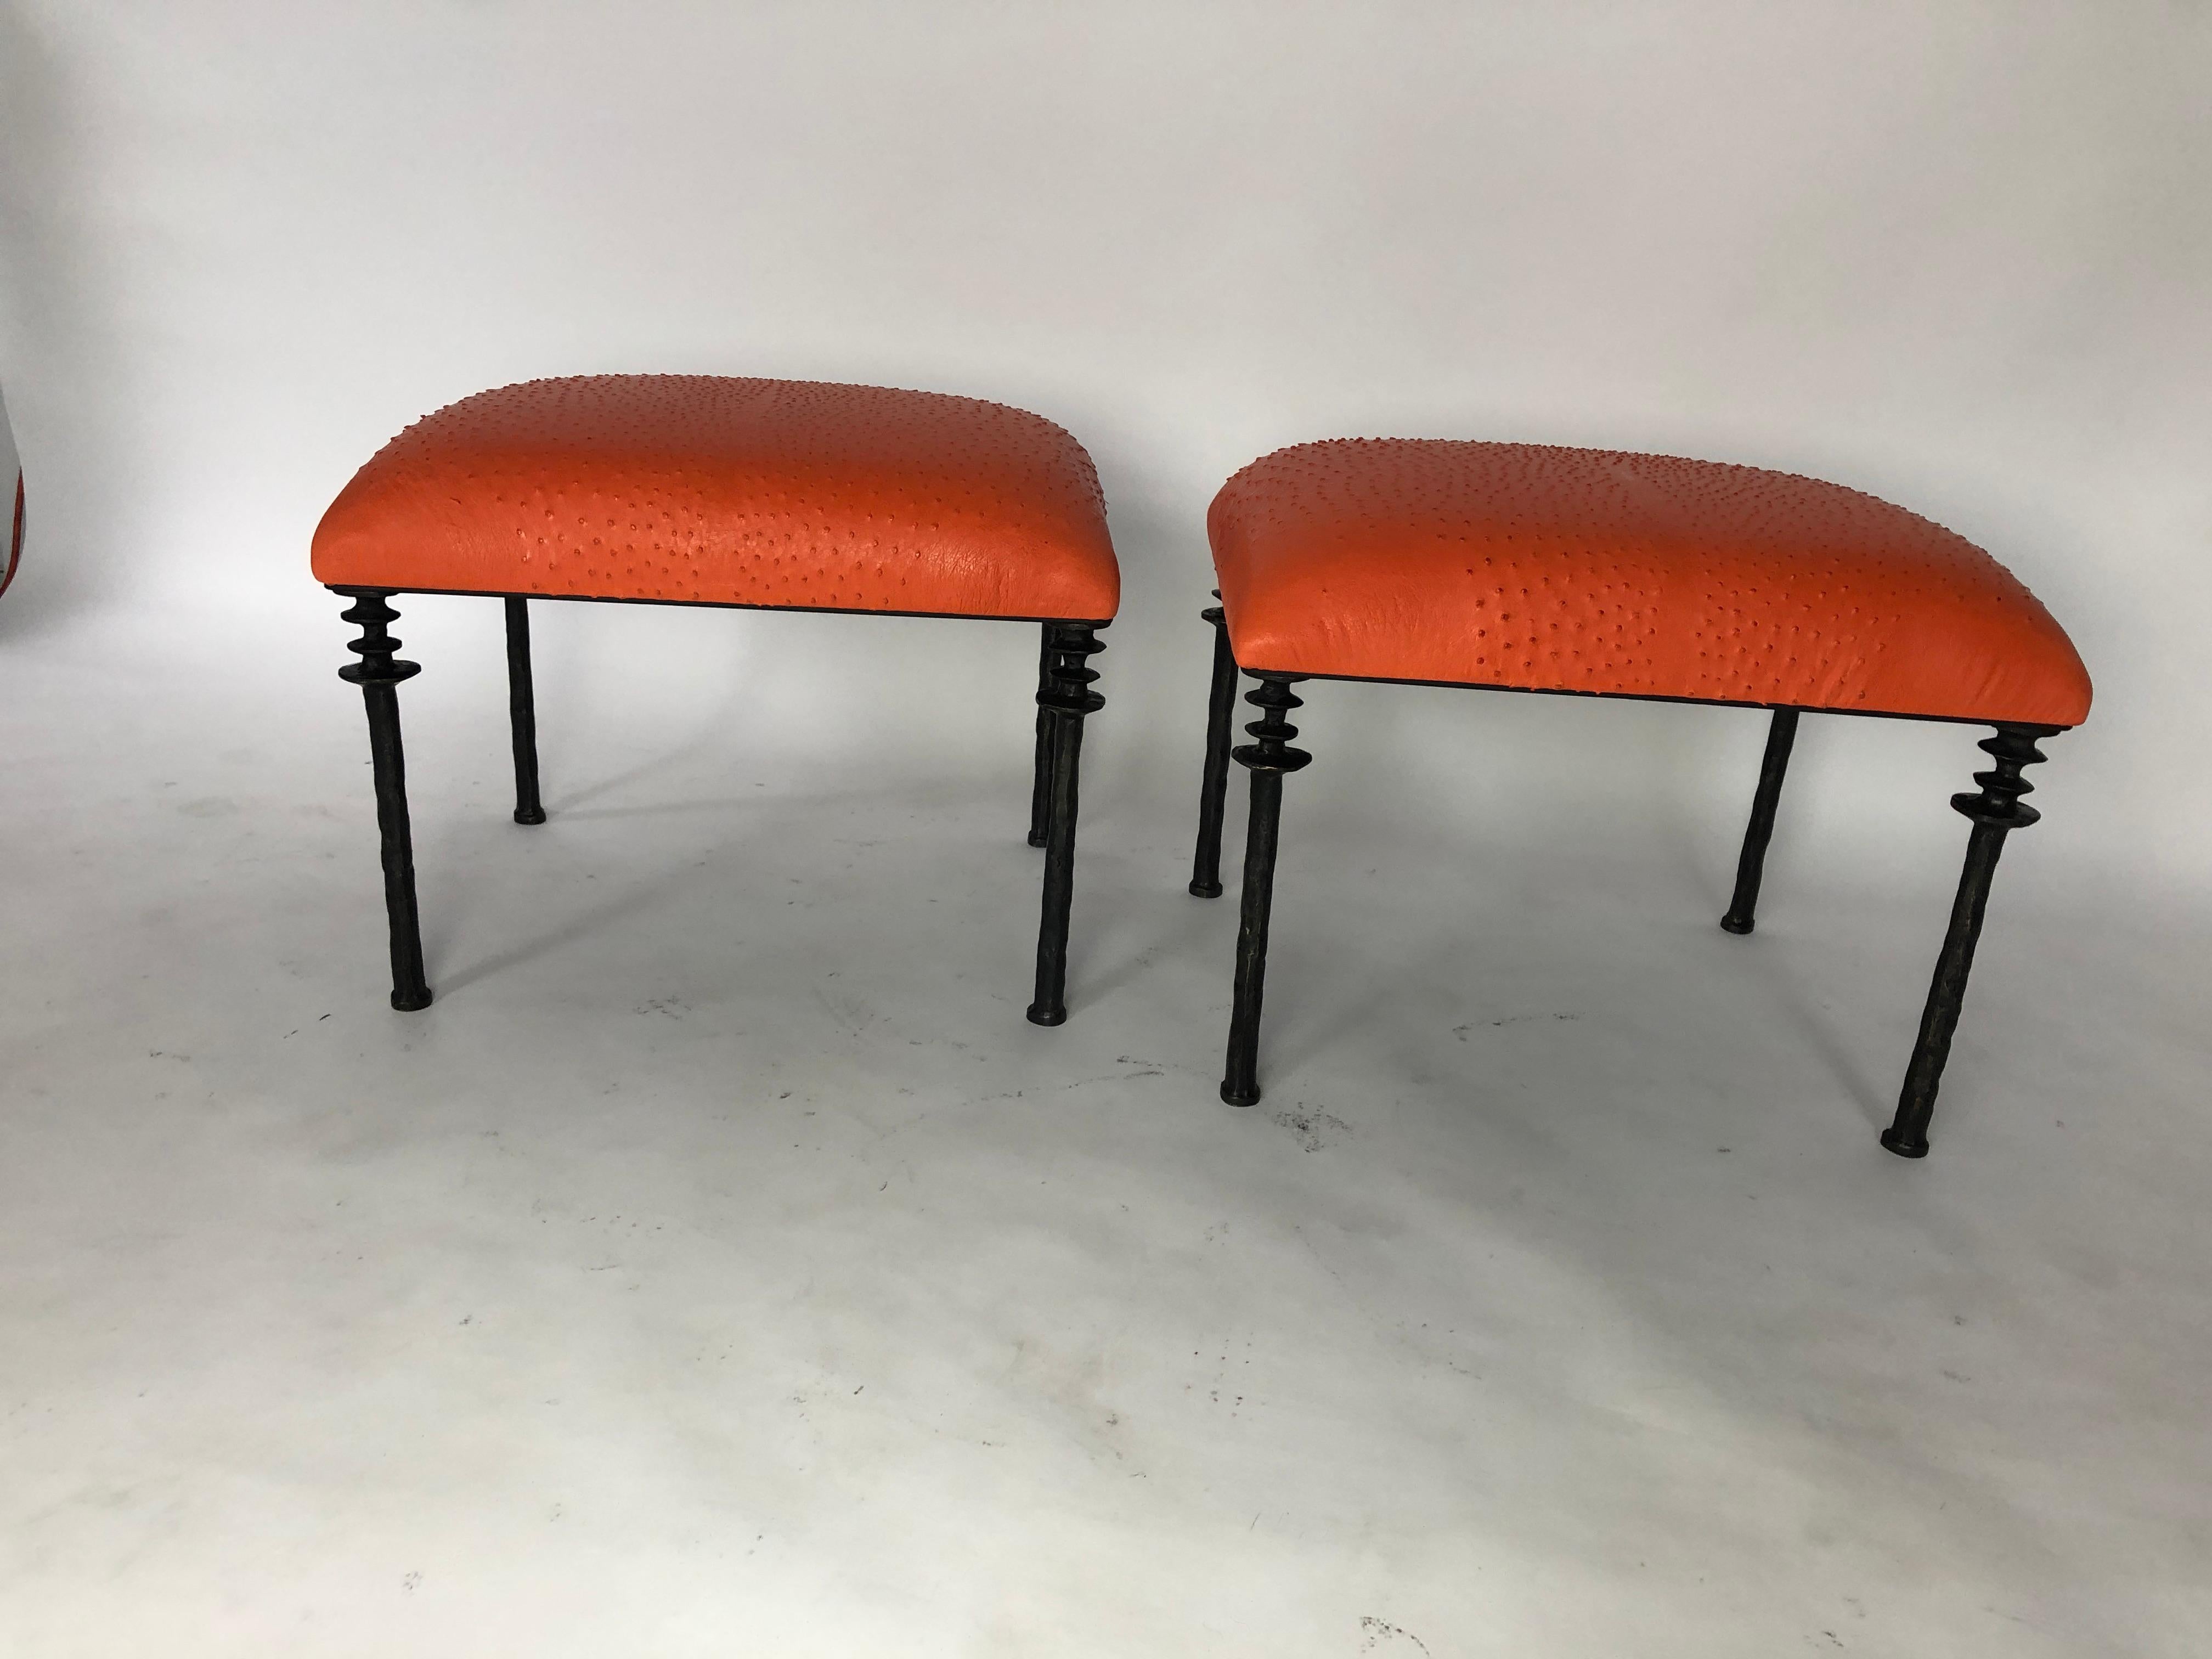 Pair of Sorgue Stools, by Bourgeois Boheme Atelier, Tangerine Ostrich Leather 4